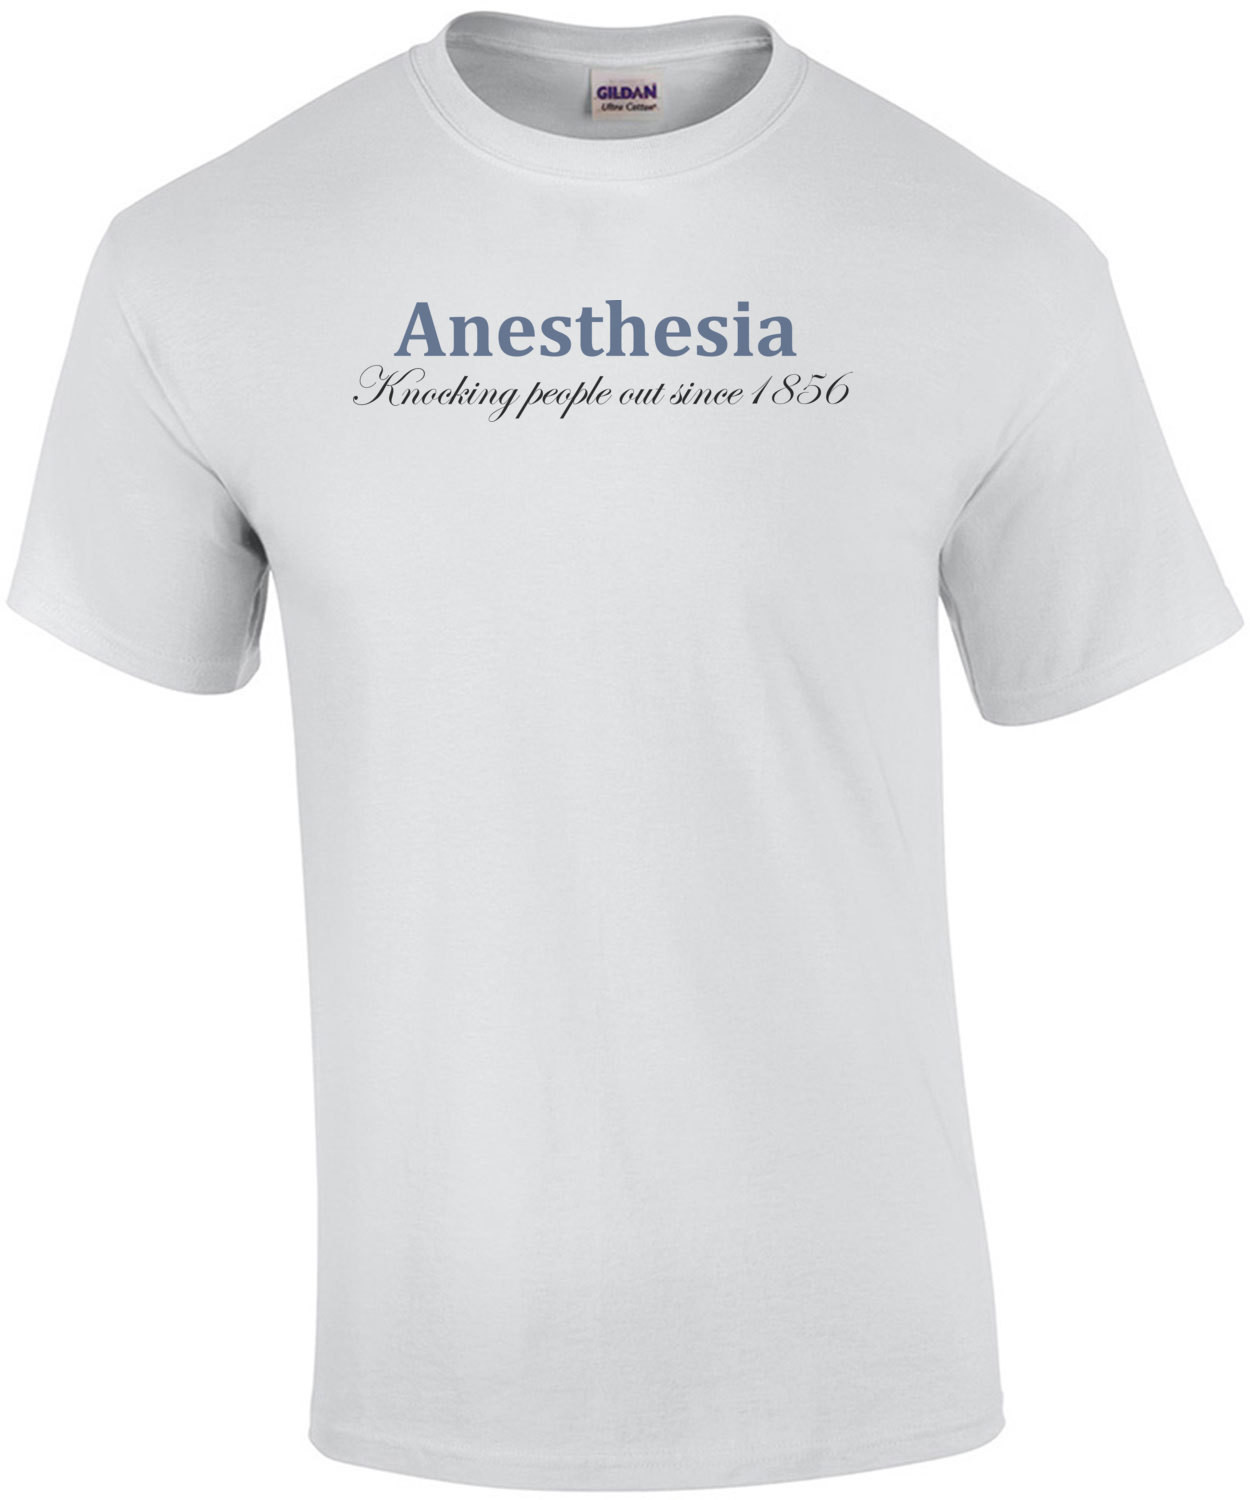 Anesthesia - Knocking people out since 1856 - funny anesthesiologist t-shirt